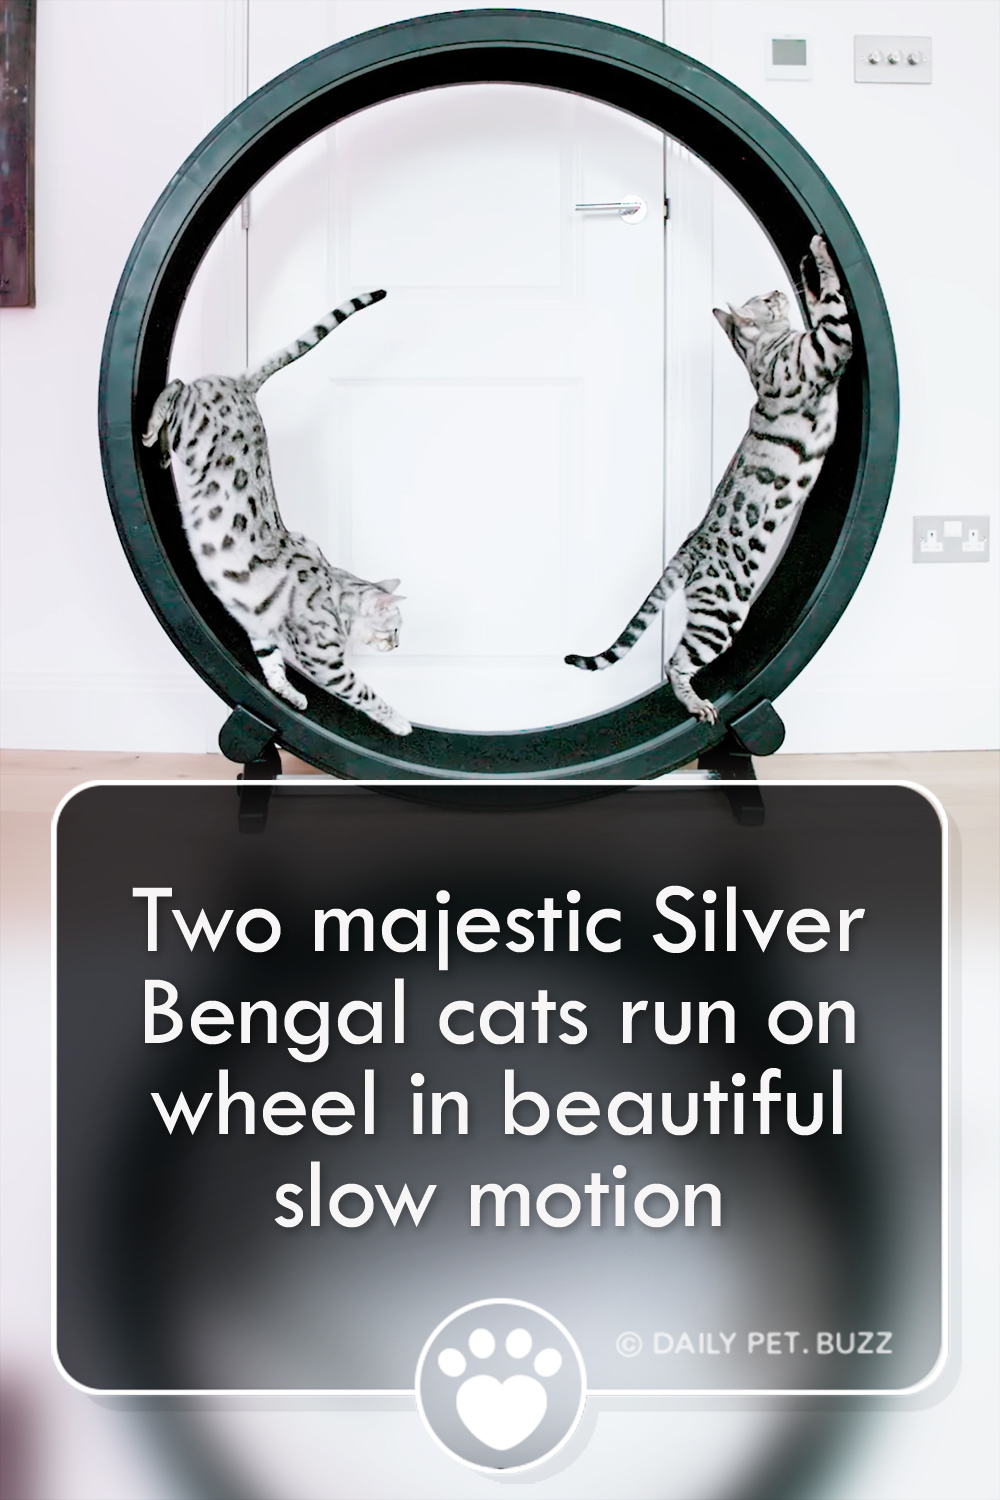 Two majestic Silver Bengal cats run on wheel in beautiful slow motion